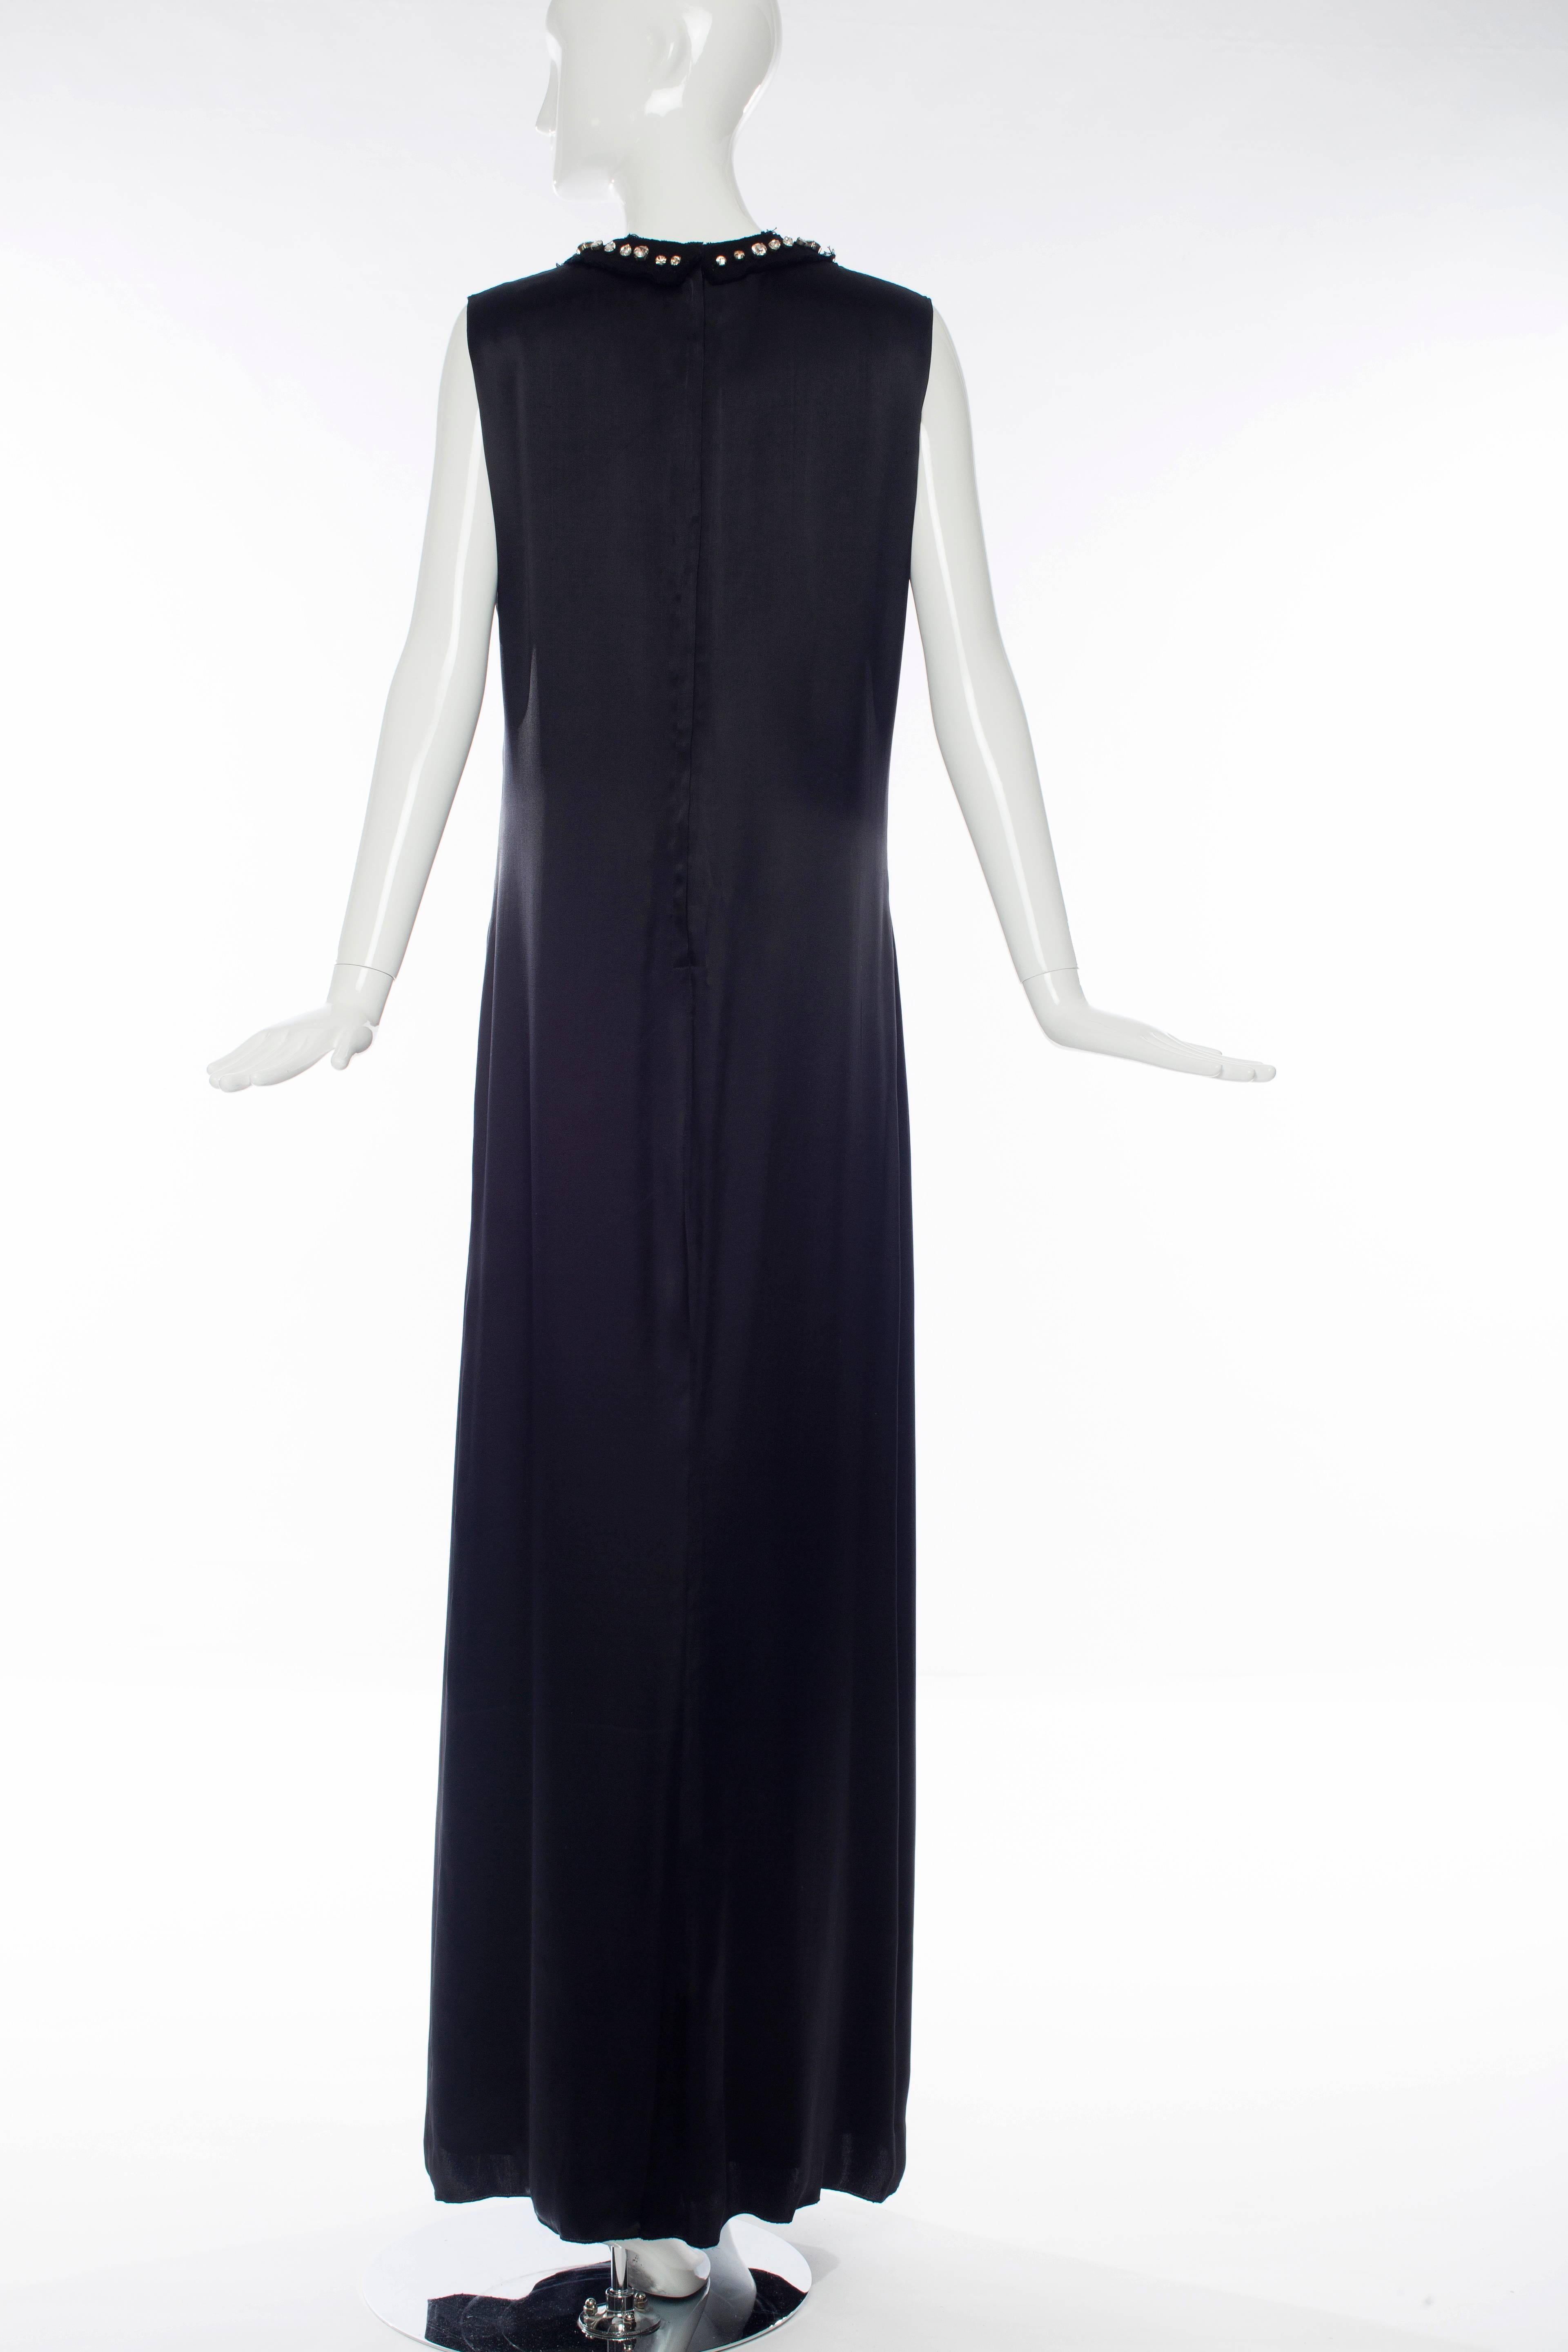 Alber Elbaz For Lanvin Sleeveless Black Viscose Silk Evening Dress, Fall 2007  In Excellent Condition For Sale In Cincinnati, OH